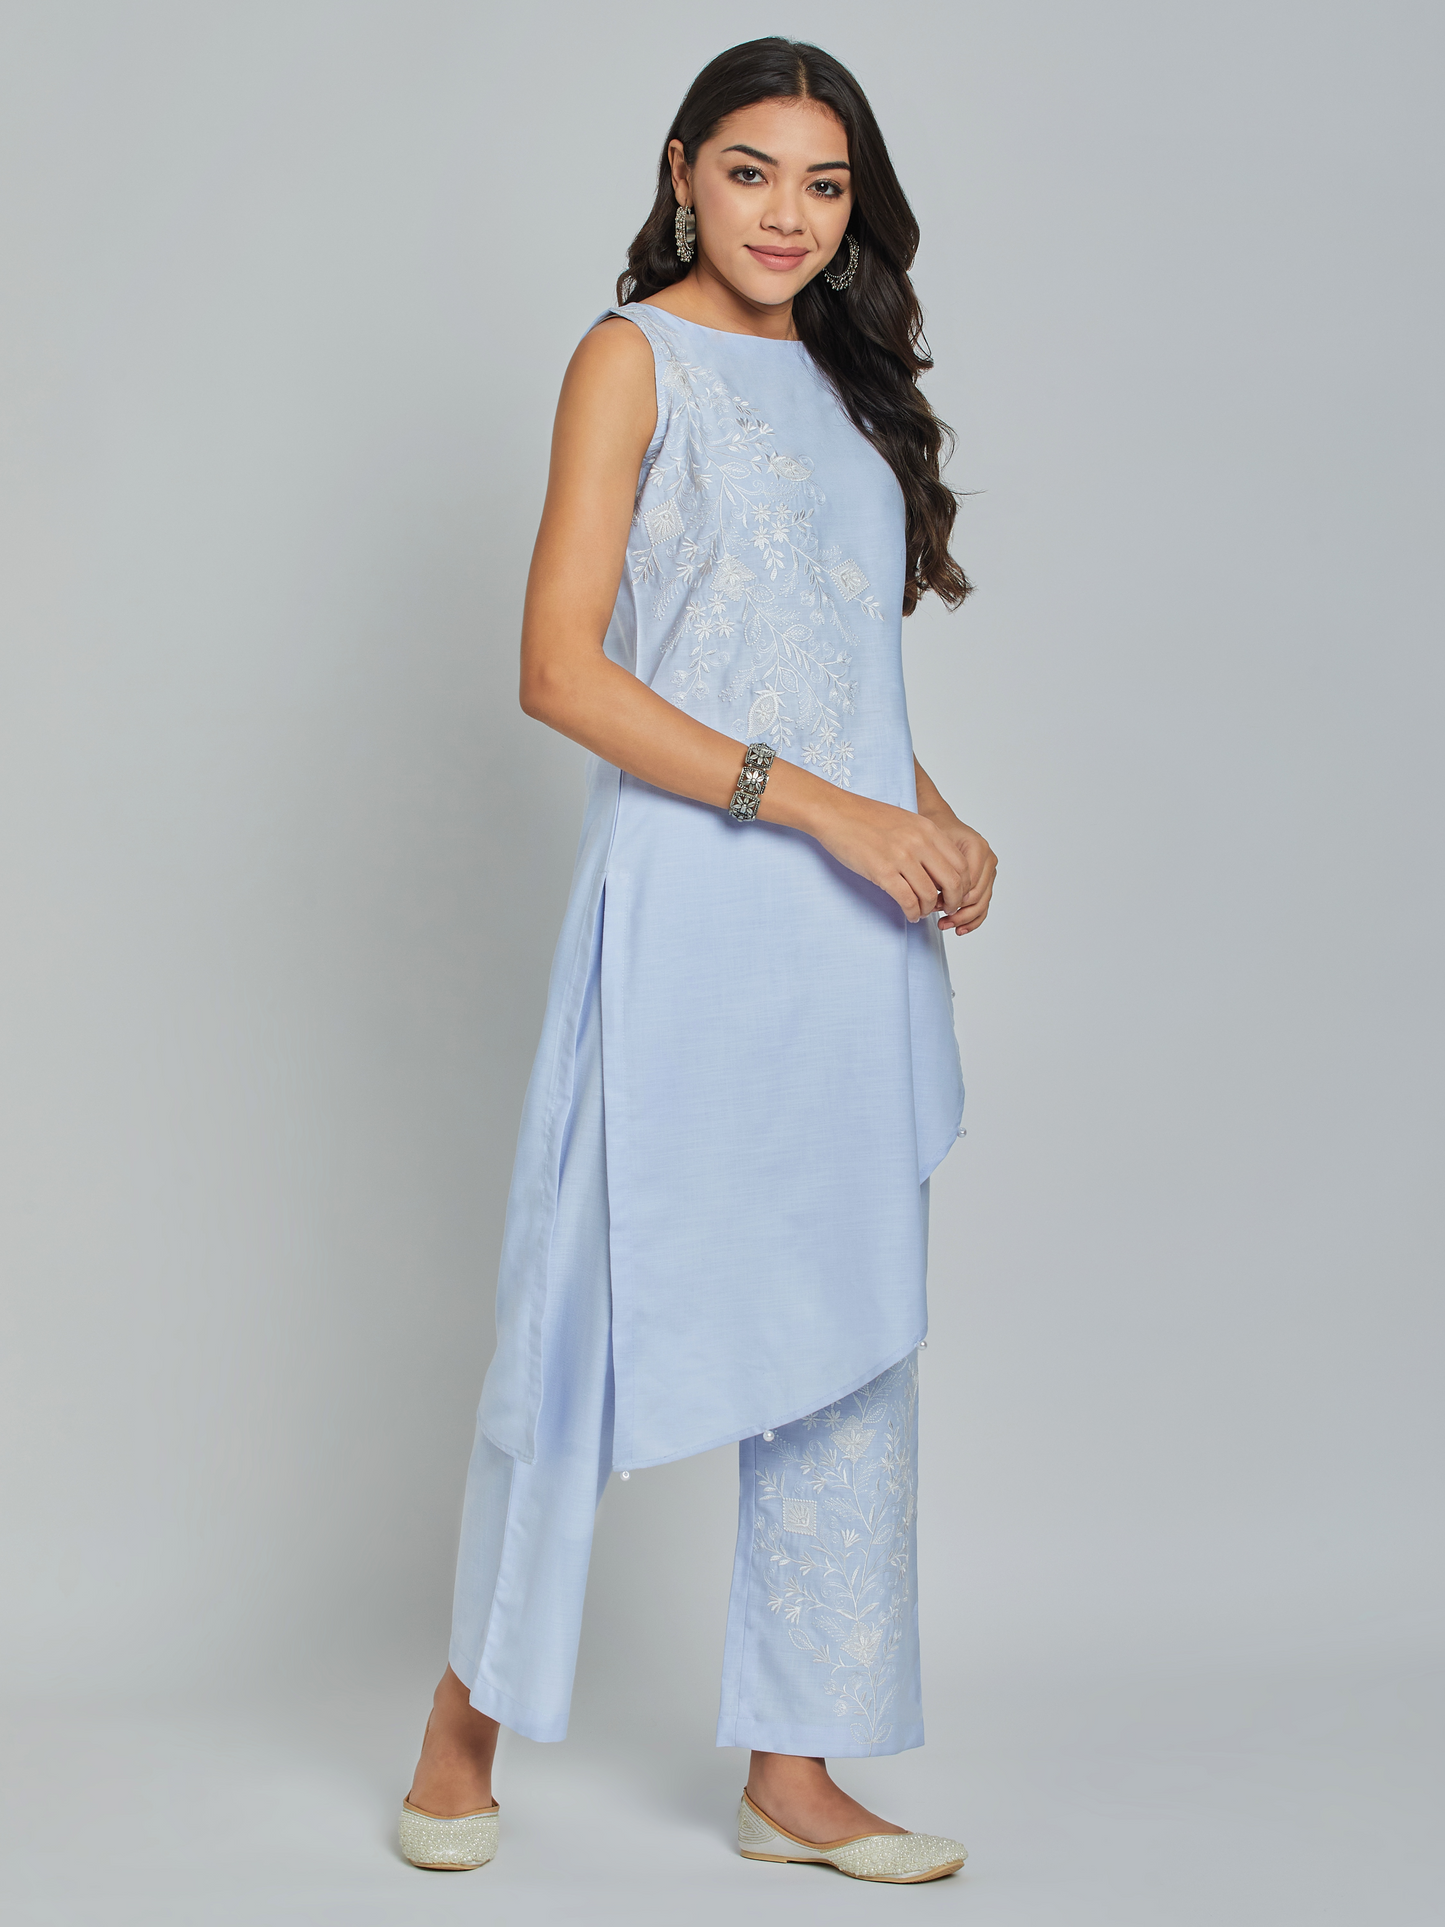 Periwinkle Embroidered Coordinate Set